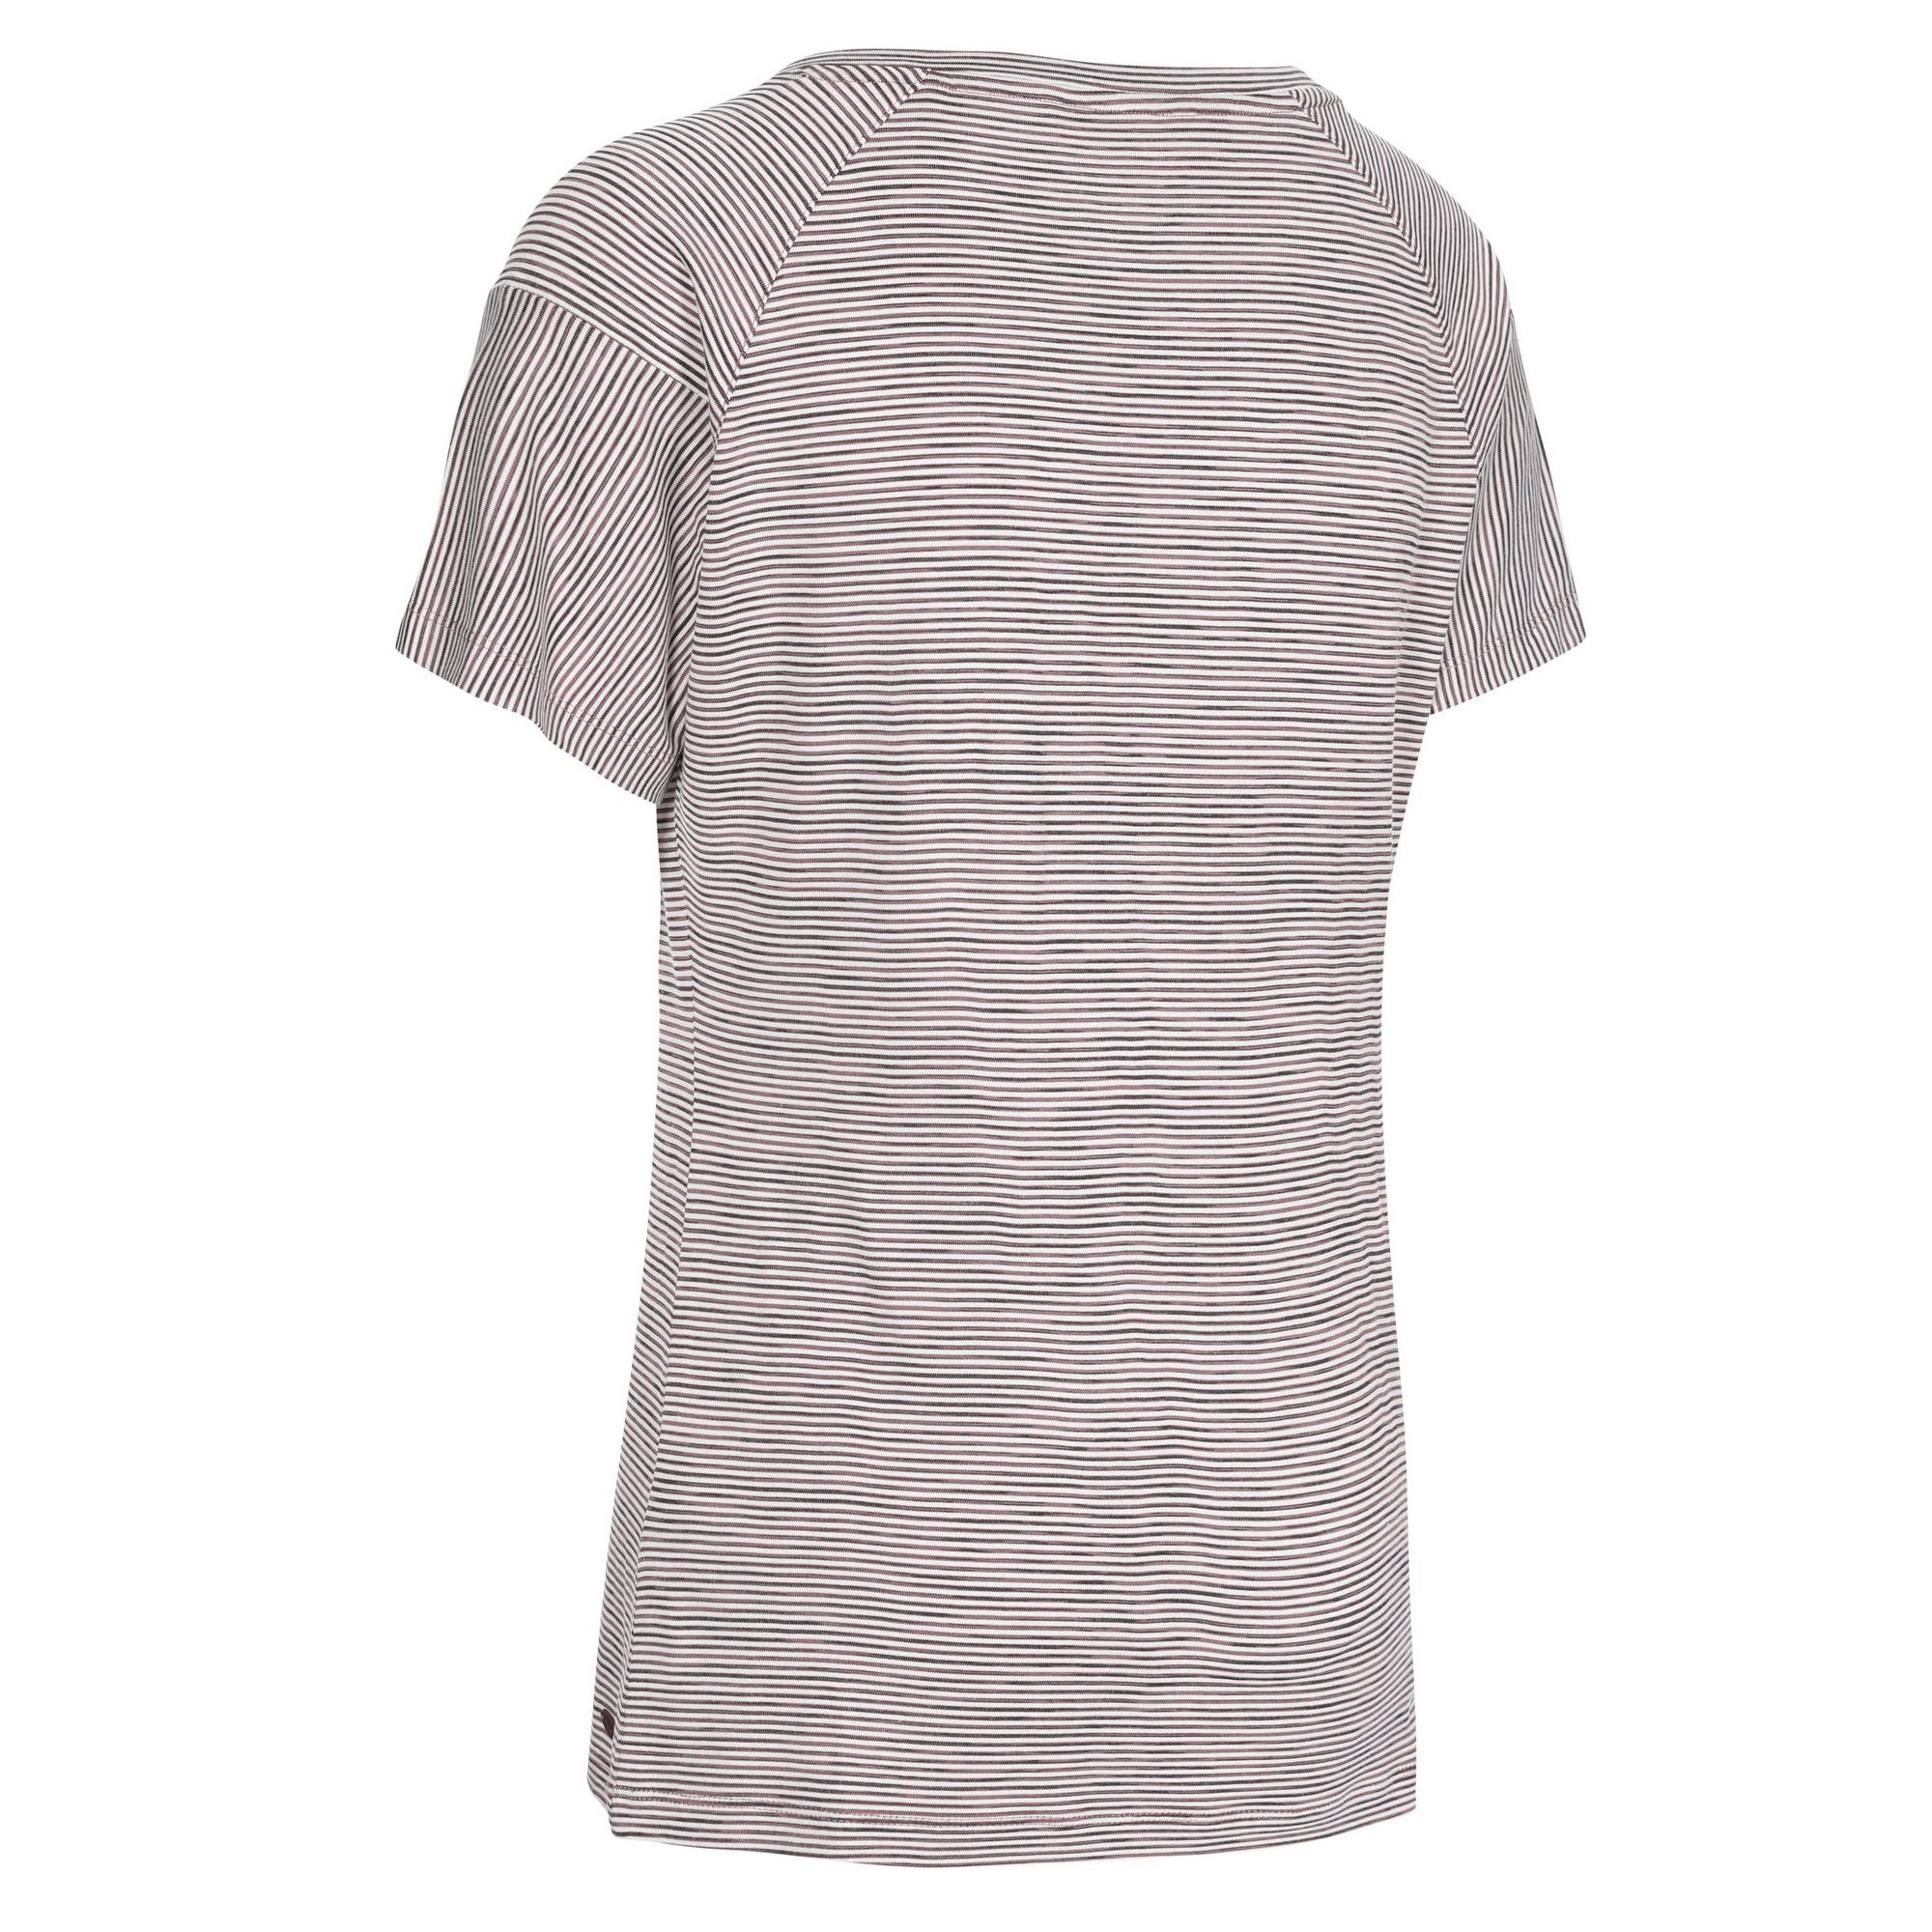 55% Polyester, 41% Rayon, 4% Spandex. V neck. Short sleeve raglan. Yarn dyed stripe. Quick dry. Trespass Womens Chest Sizing (approx): XS/8 - 32in/81cm, S/10 - 34in/86cm, M/12 - 36in/91.4cm, L/14 - 38in/96.5cm, XL/16 - 40in/101.5cm, XXL/18 - 42in/106.5cm.